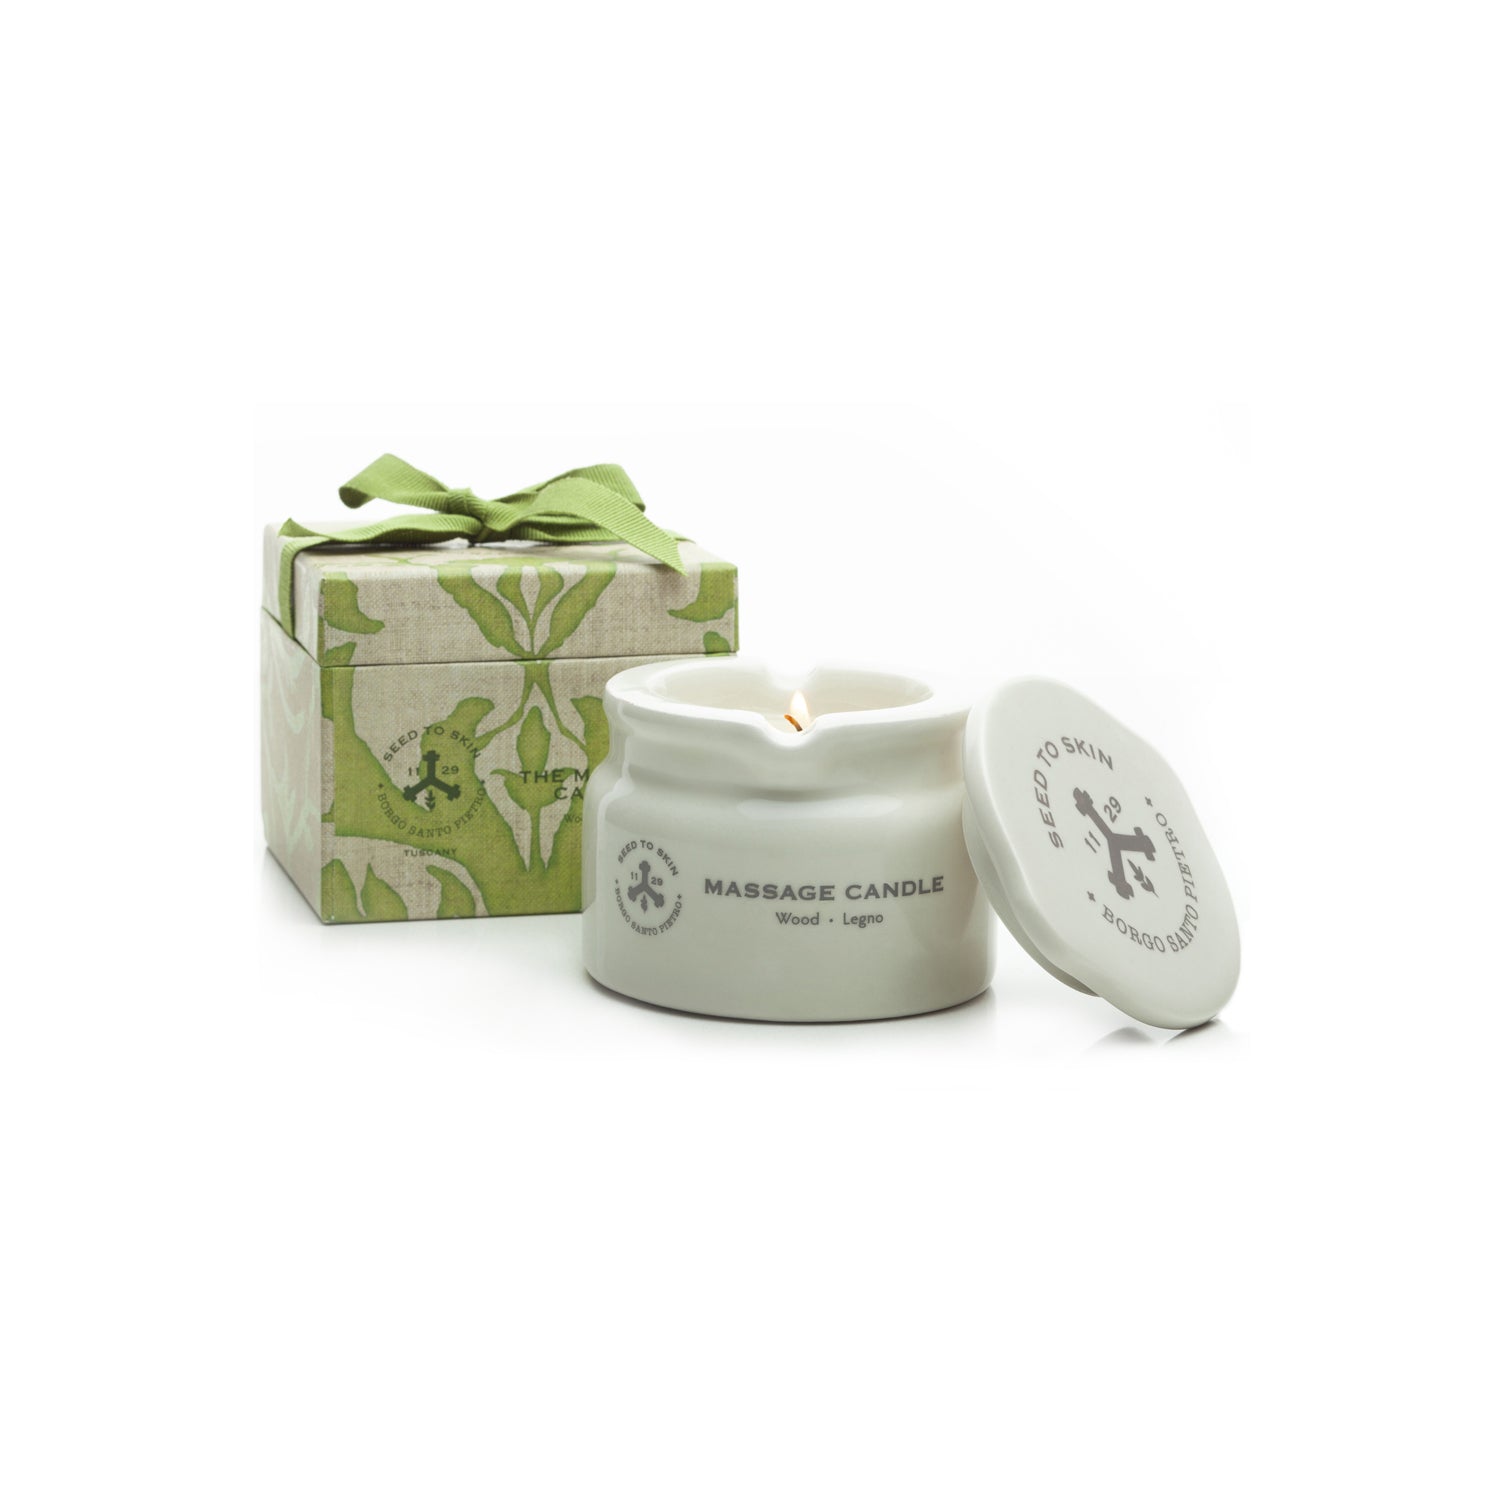 SEED TO SKIN TUSCANY - The Massage Candle – The Green Jungle Beauty Shop